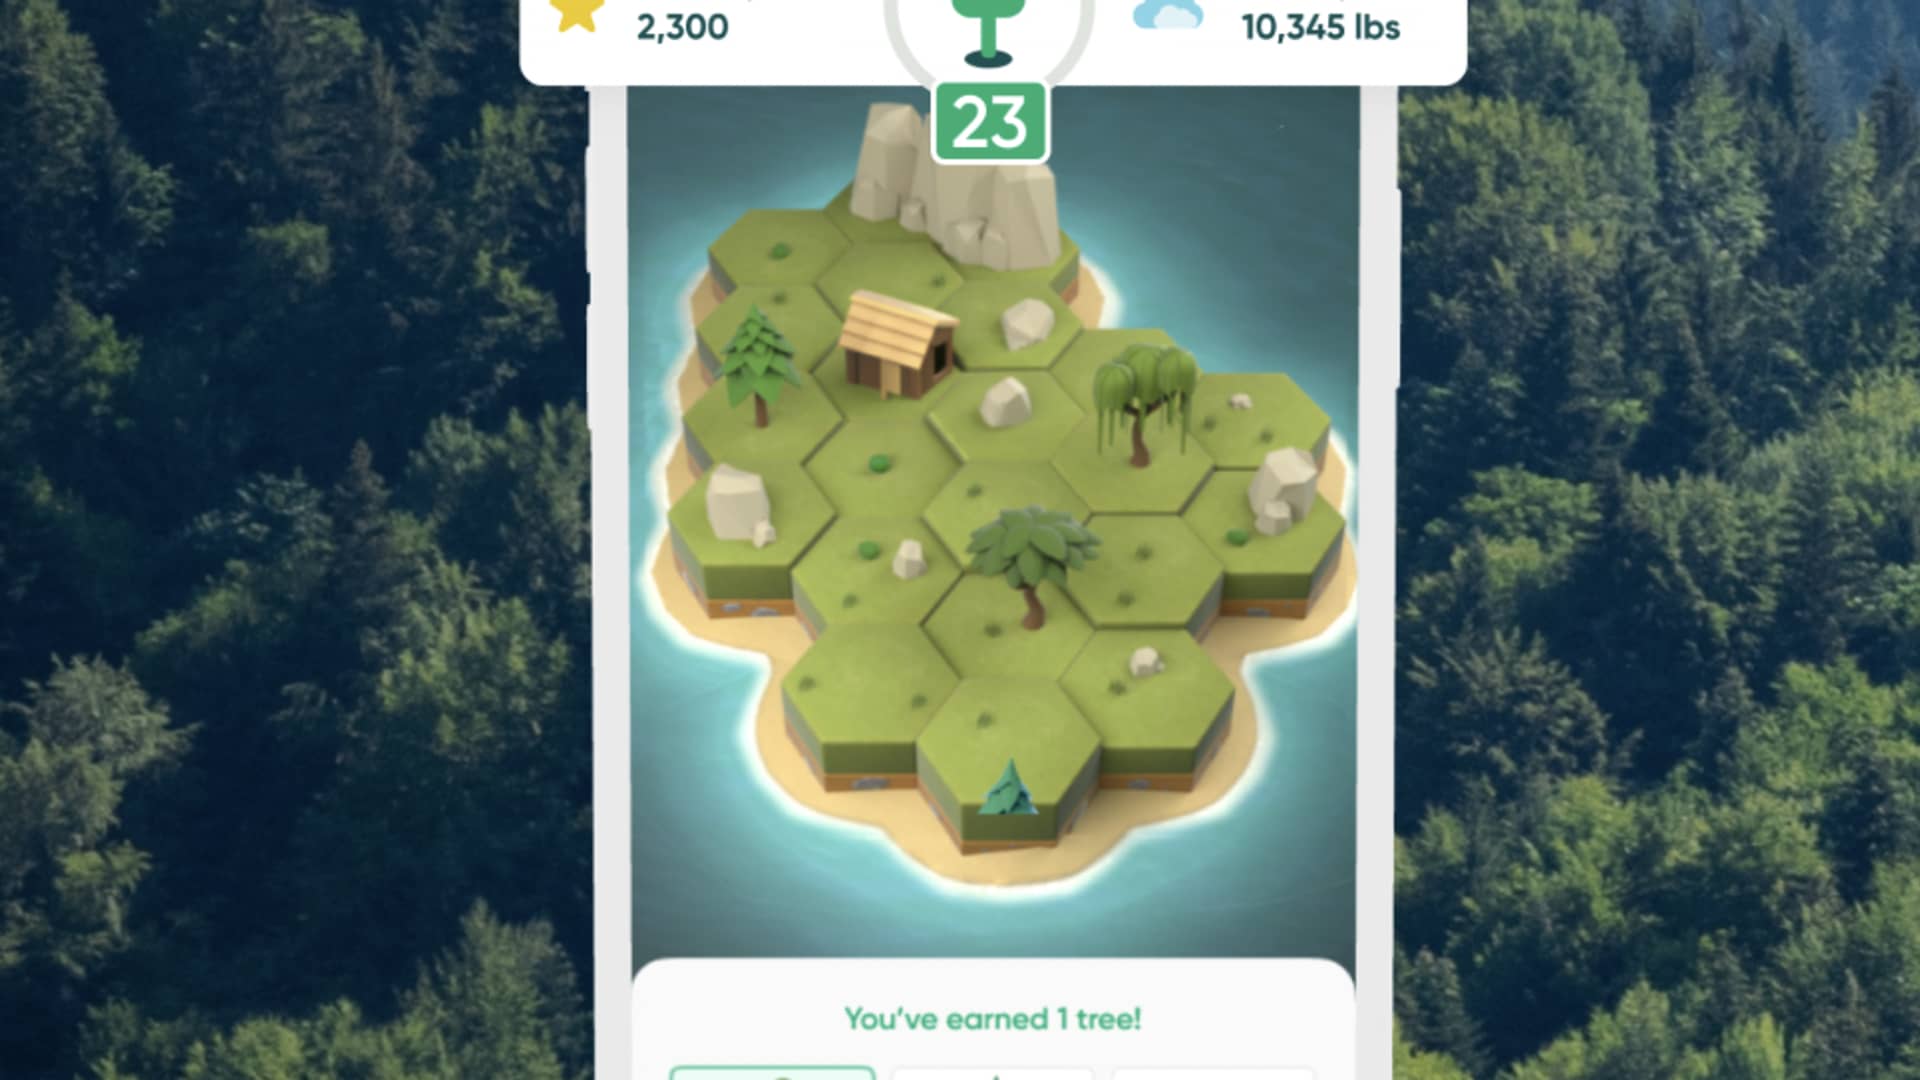 The TreeCard app includes a game that lets users visualize how many trees their activity has helped produce.